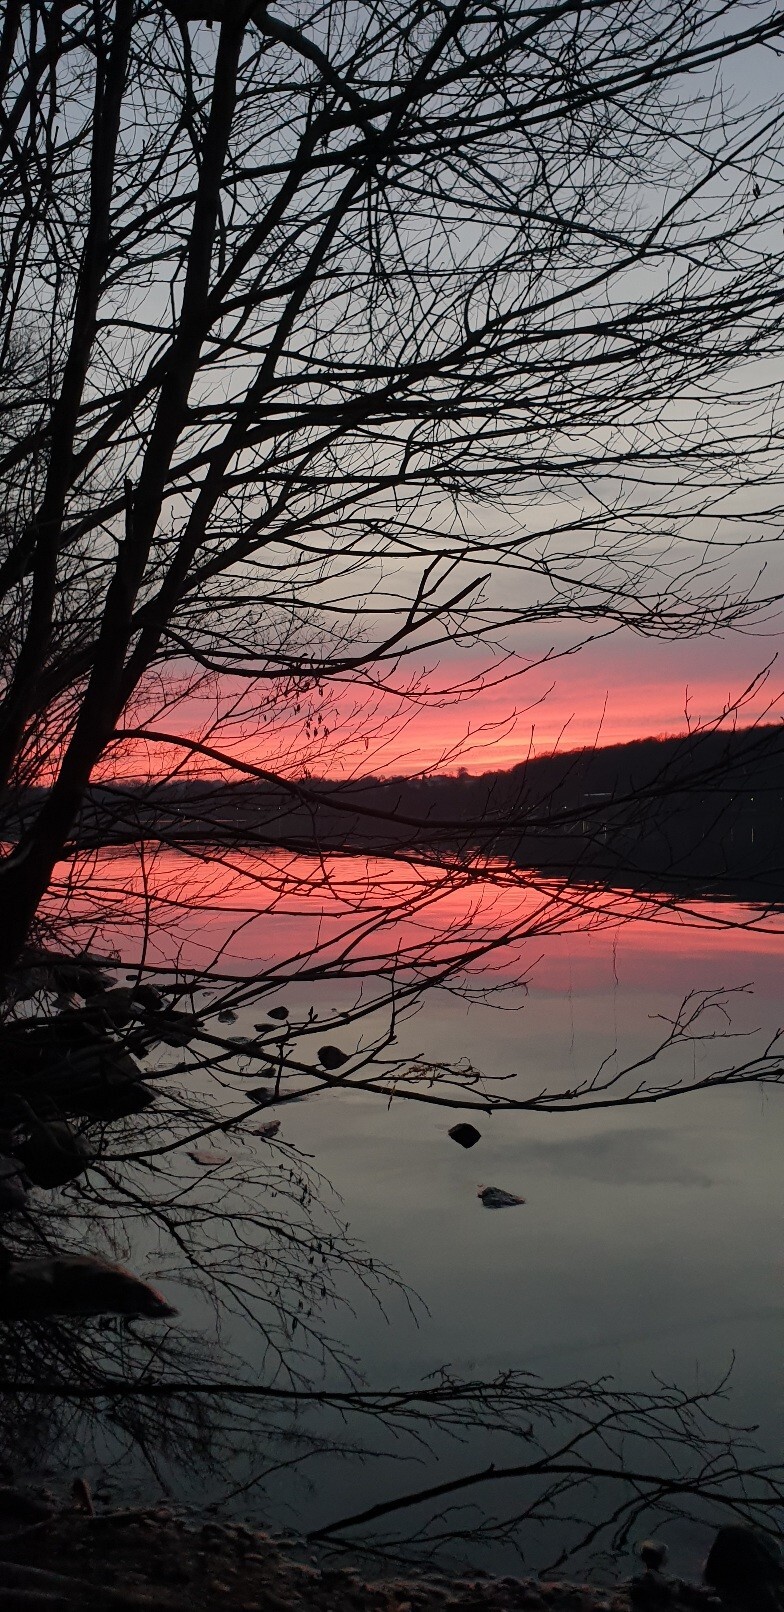 A photo of a sunset taken at a lake. The sunset creates a deep red stripe above the dark shore scross the lake that is reflected by the grey water. The branches of a tree leaning over the shore lay over the scene, seeming almost black in this light.